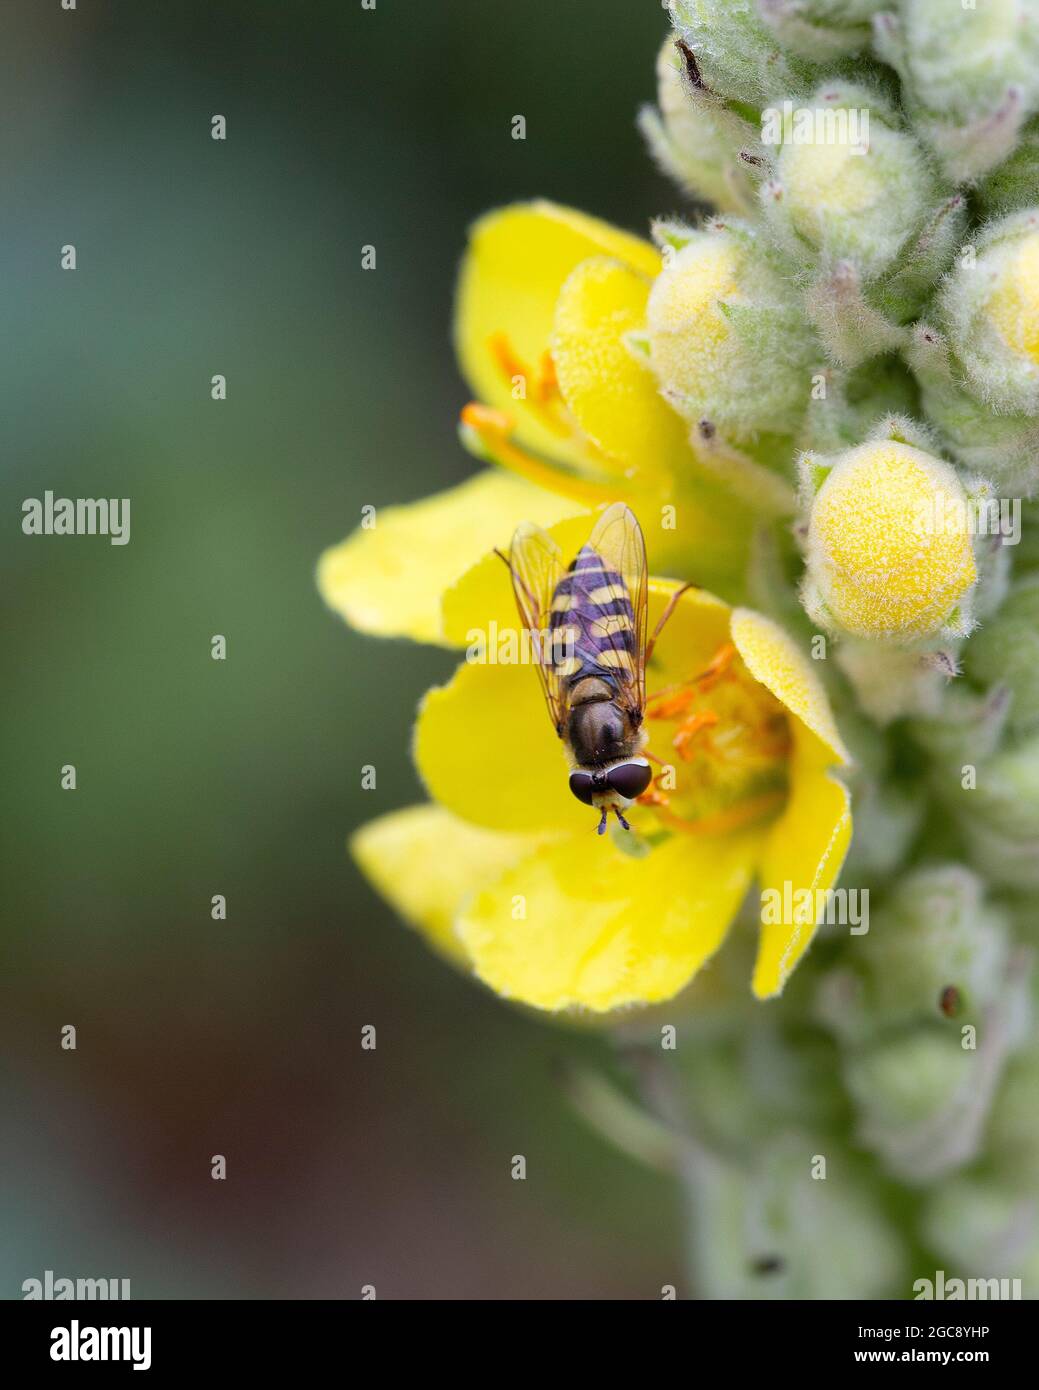 Hoverfly Eupeodes corollae on flower of Great mullein (Verbascum thapsus) Stock Photo